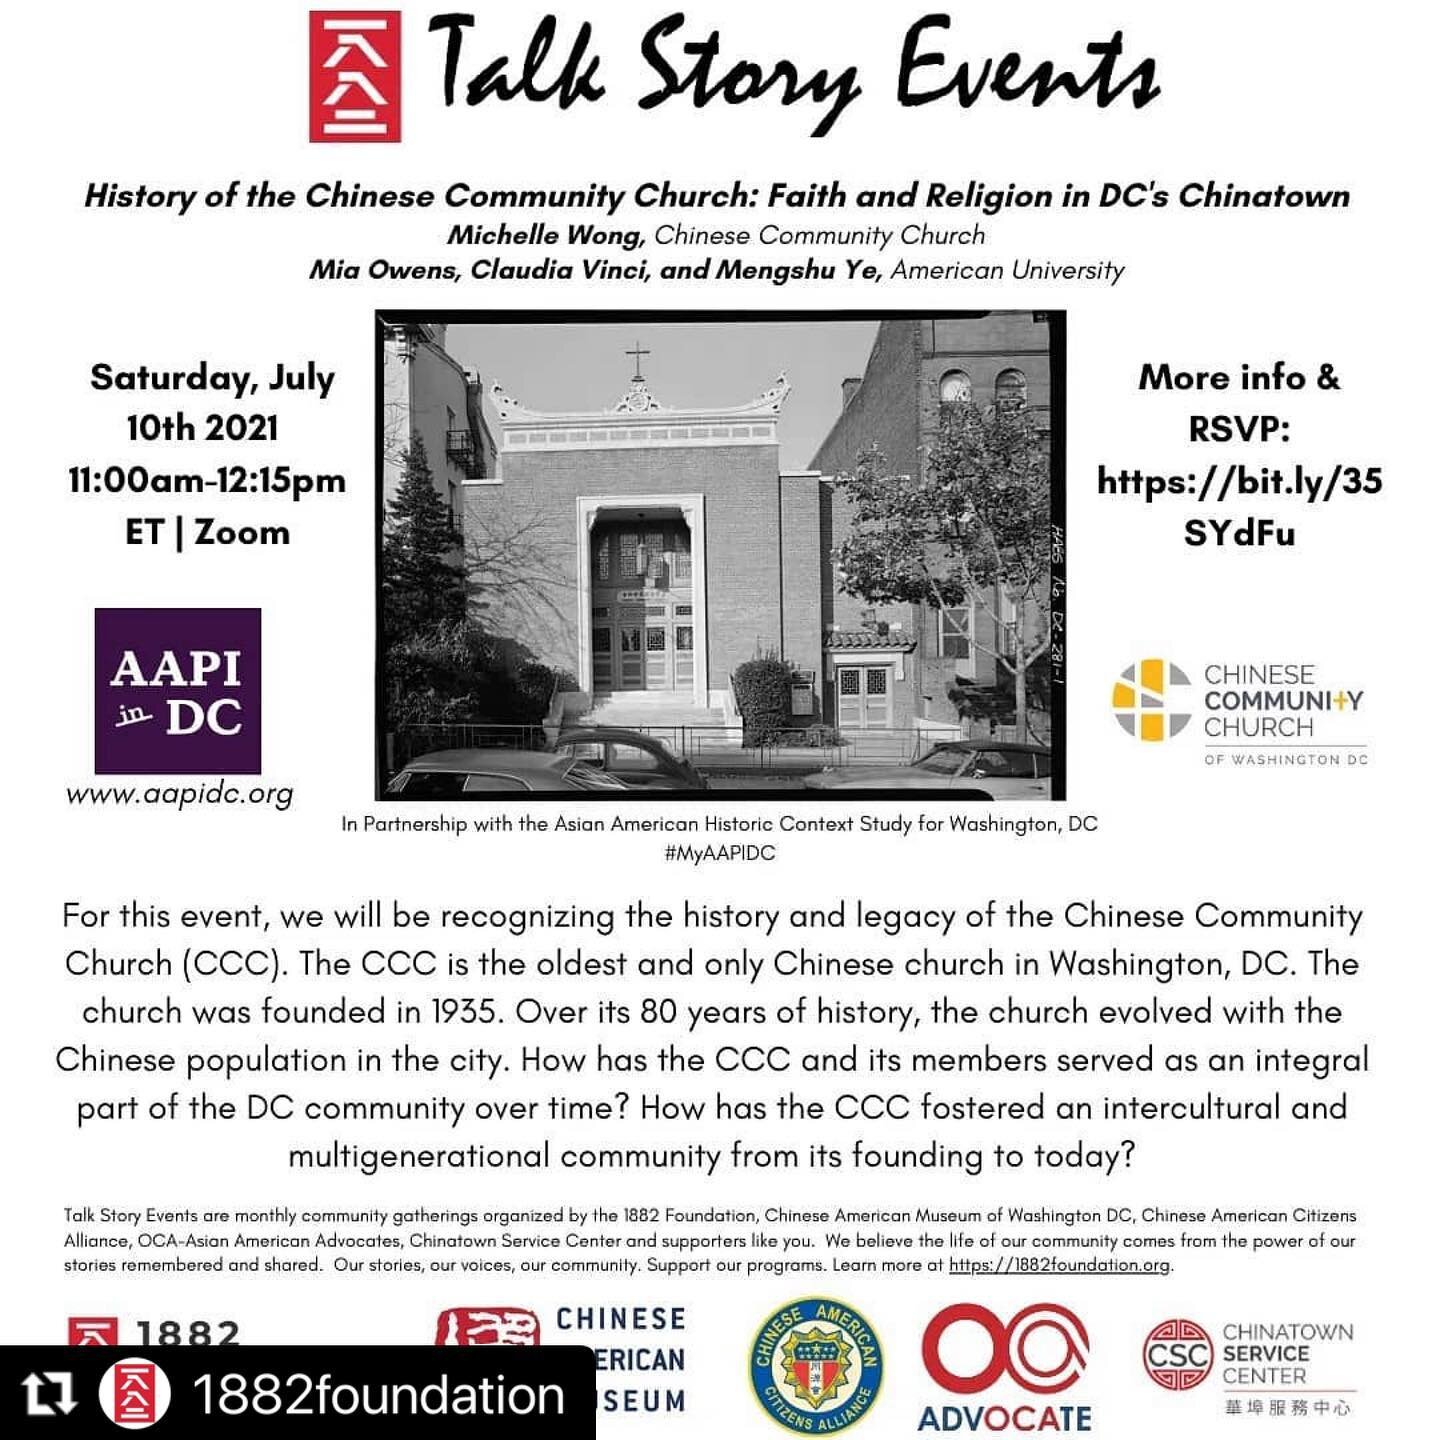 Join us this Saturday!!! #Repost @1882foundation
・・・
Hello everyone! Come join us in our upcoming Talk Story! on July 10th! Further details as well as the registration link can be found through the link in bio @1882foundation. Hope to see you there!